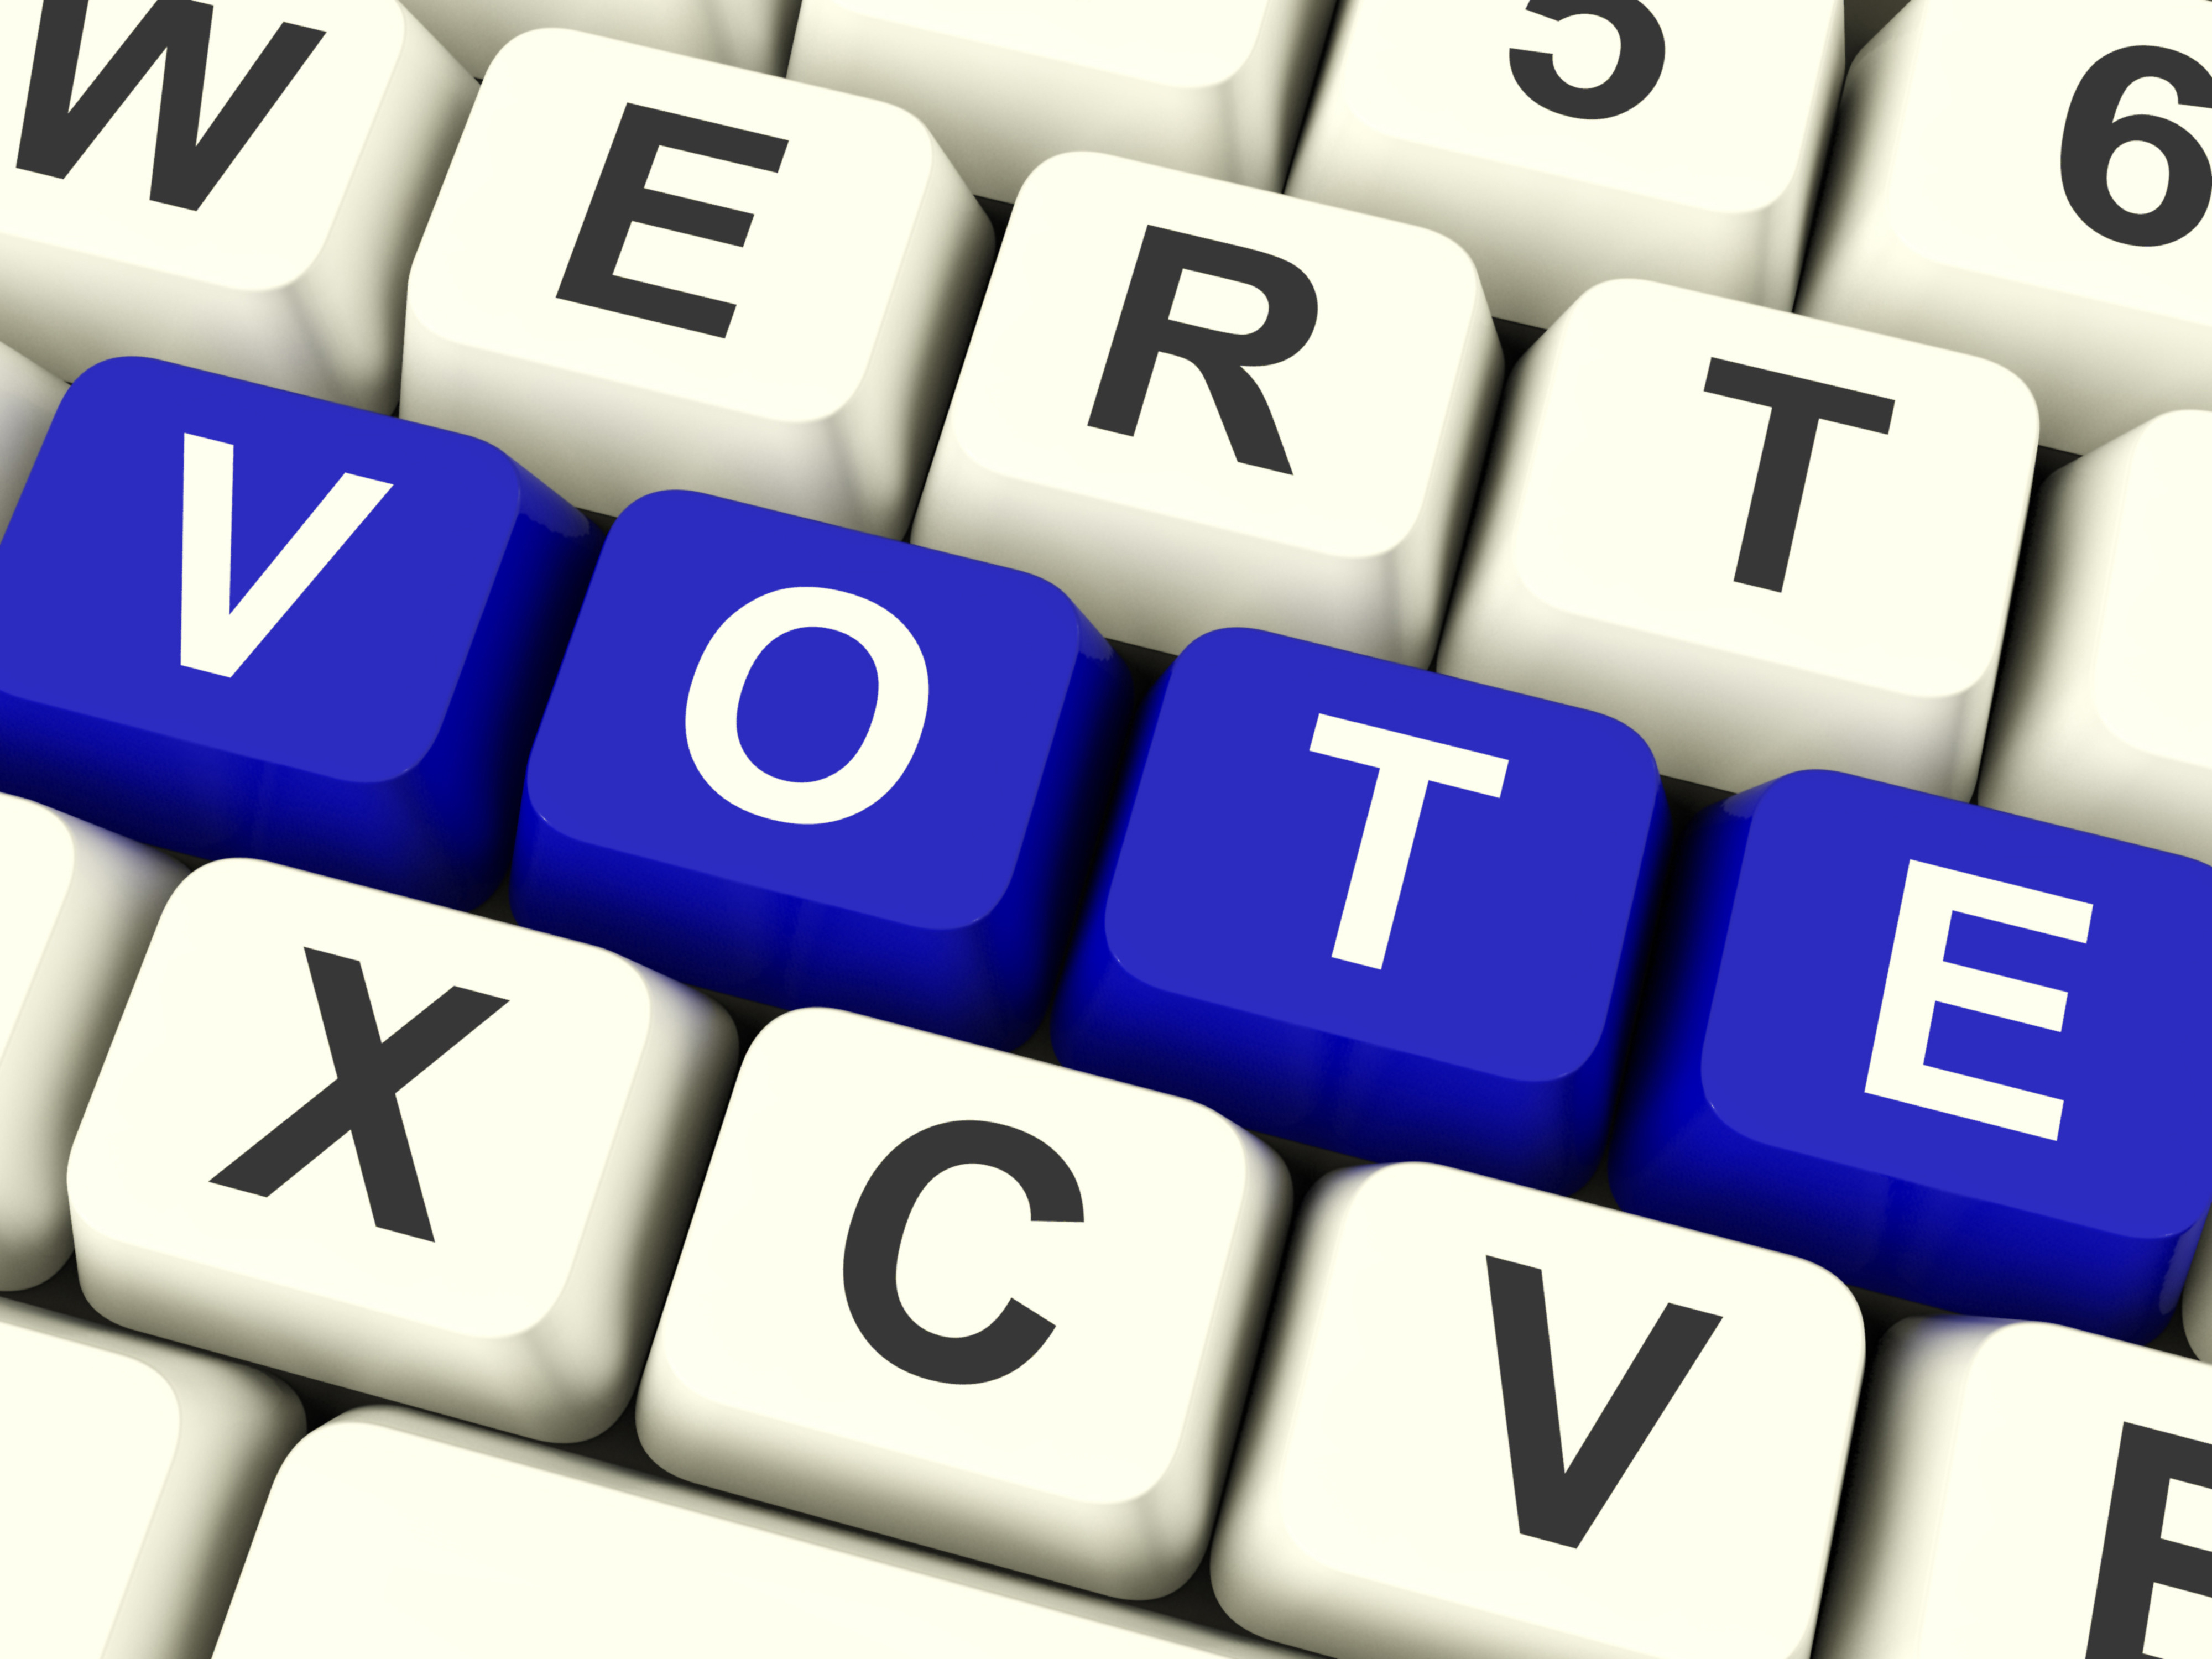 A keyboard with the letters on the second row rearranged to read “VOTE.” S. The “vote” keys are blue with white text and the surrounding keys are white with black text. 